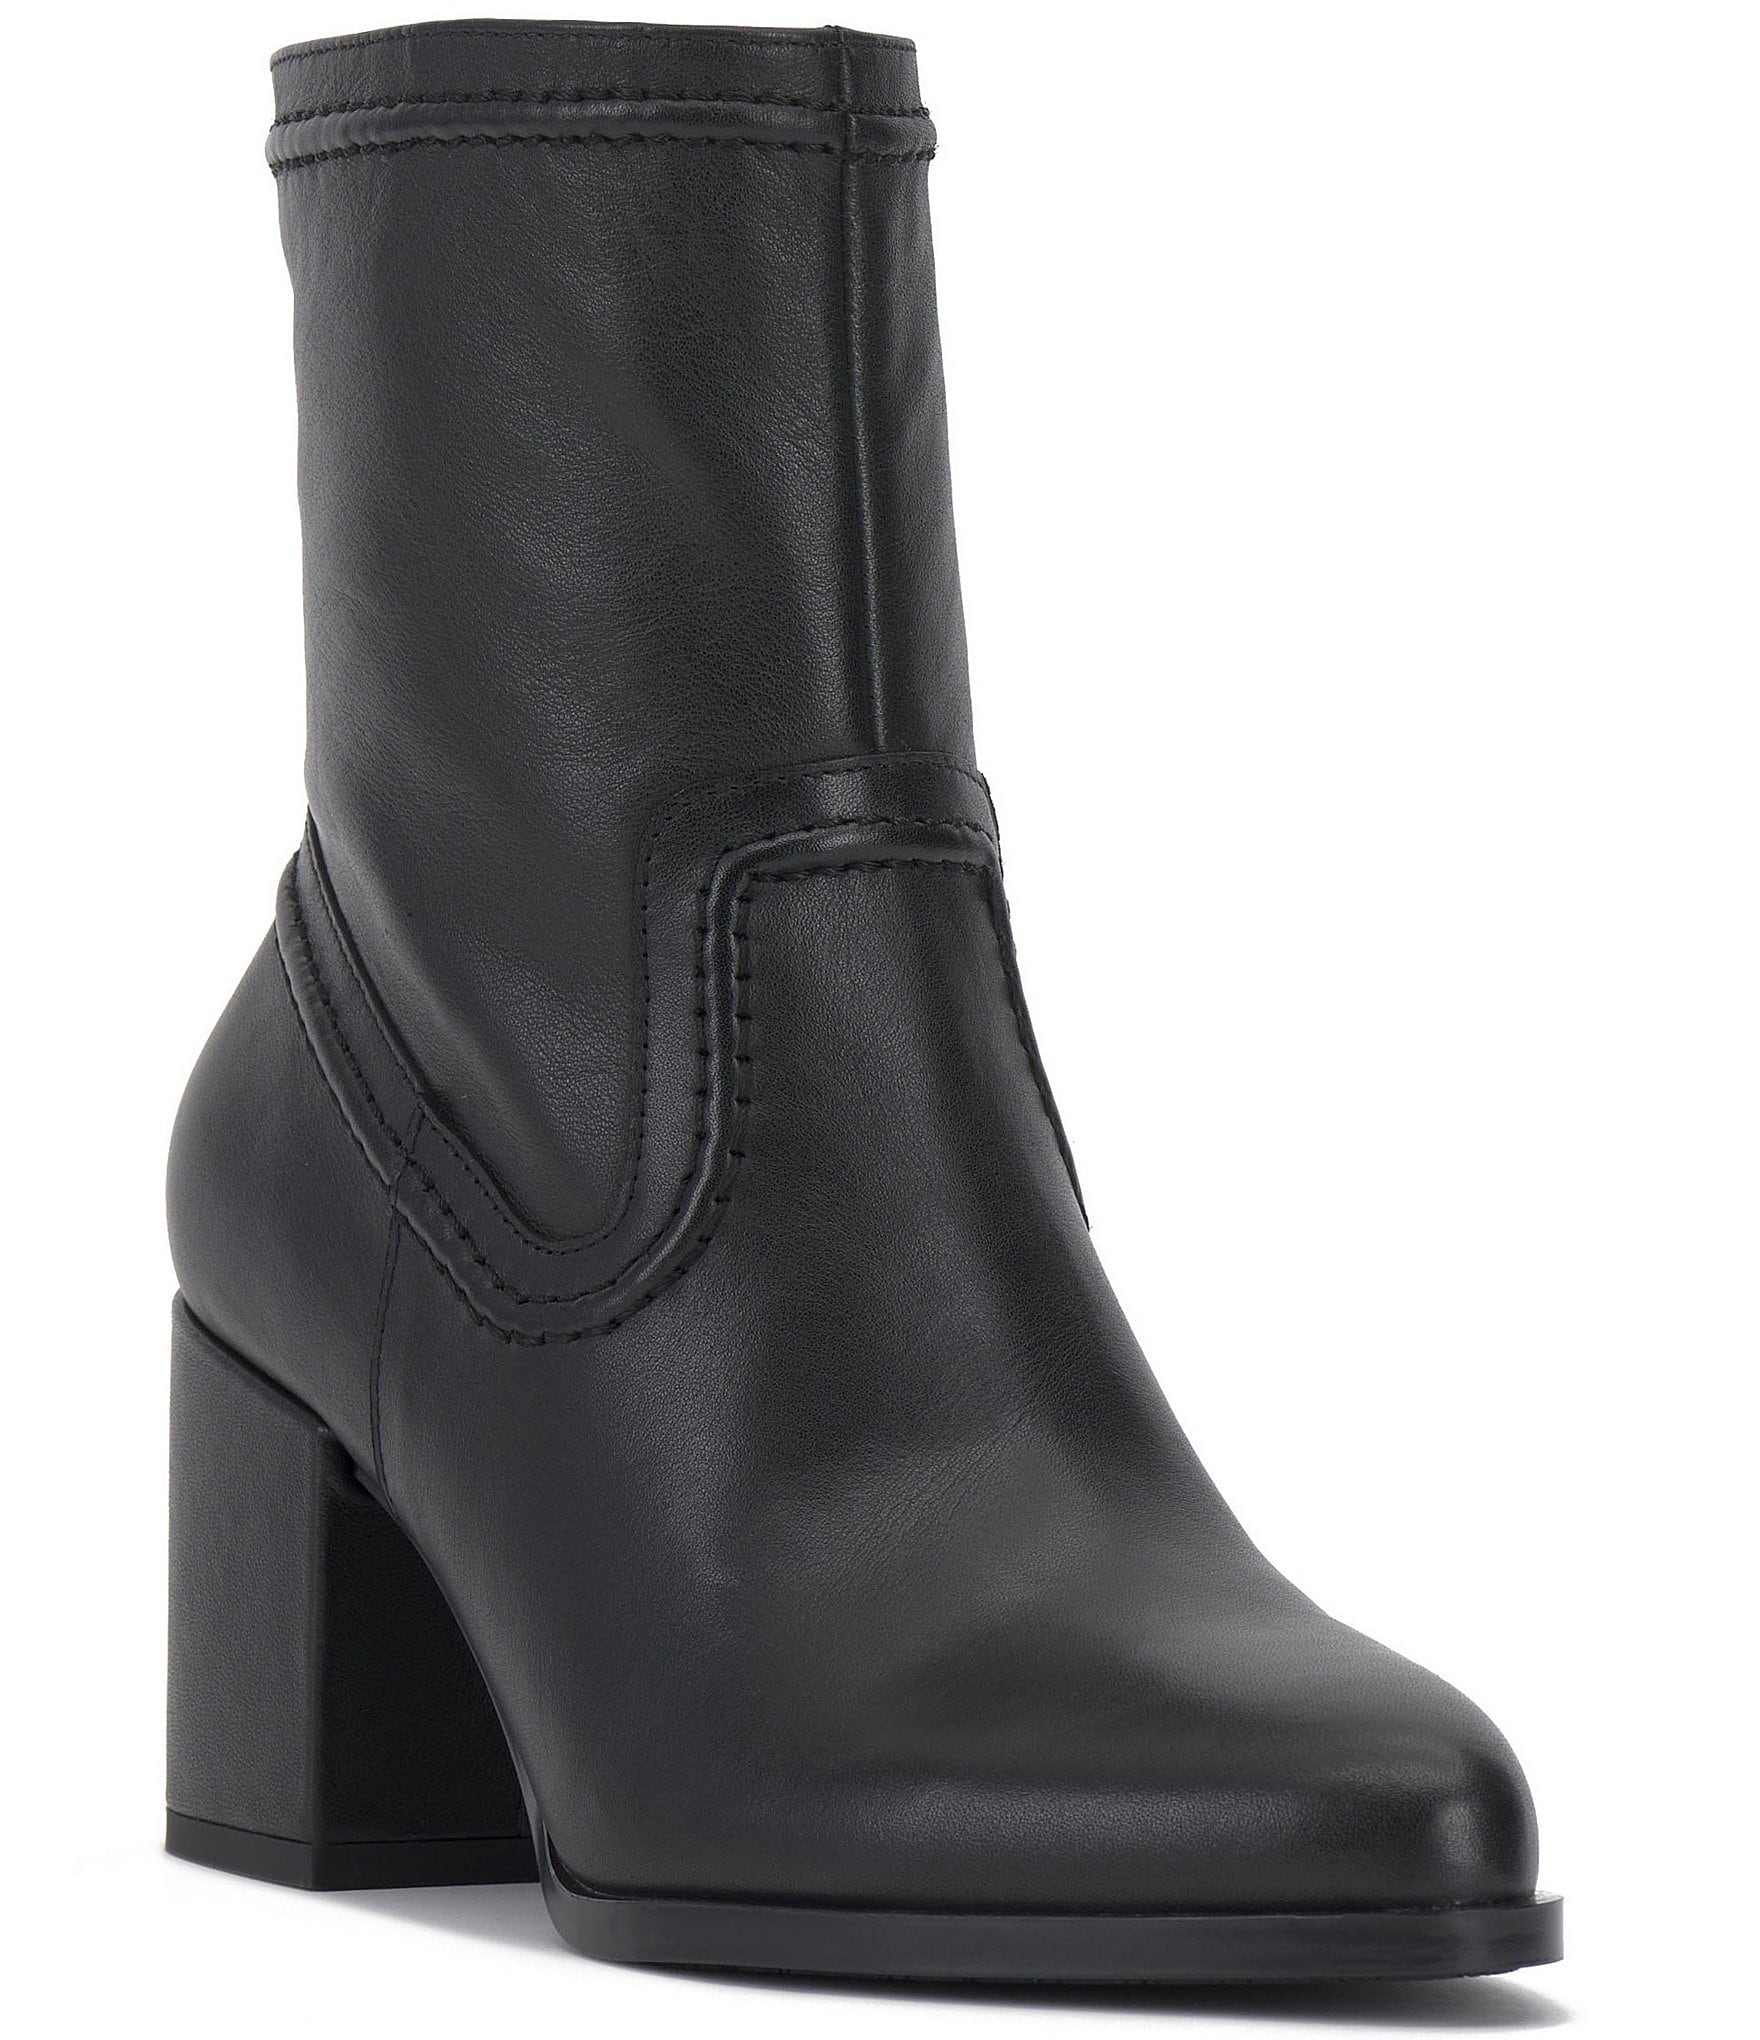 Vince Camuto Pailey Leather Booties | Dillard's